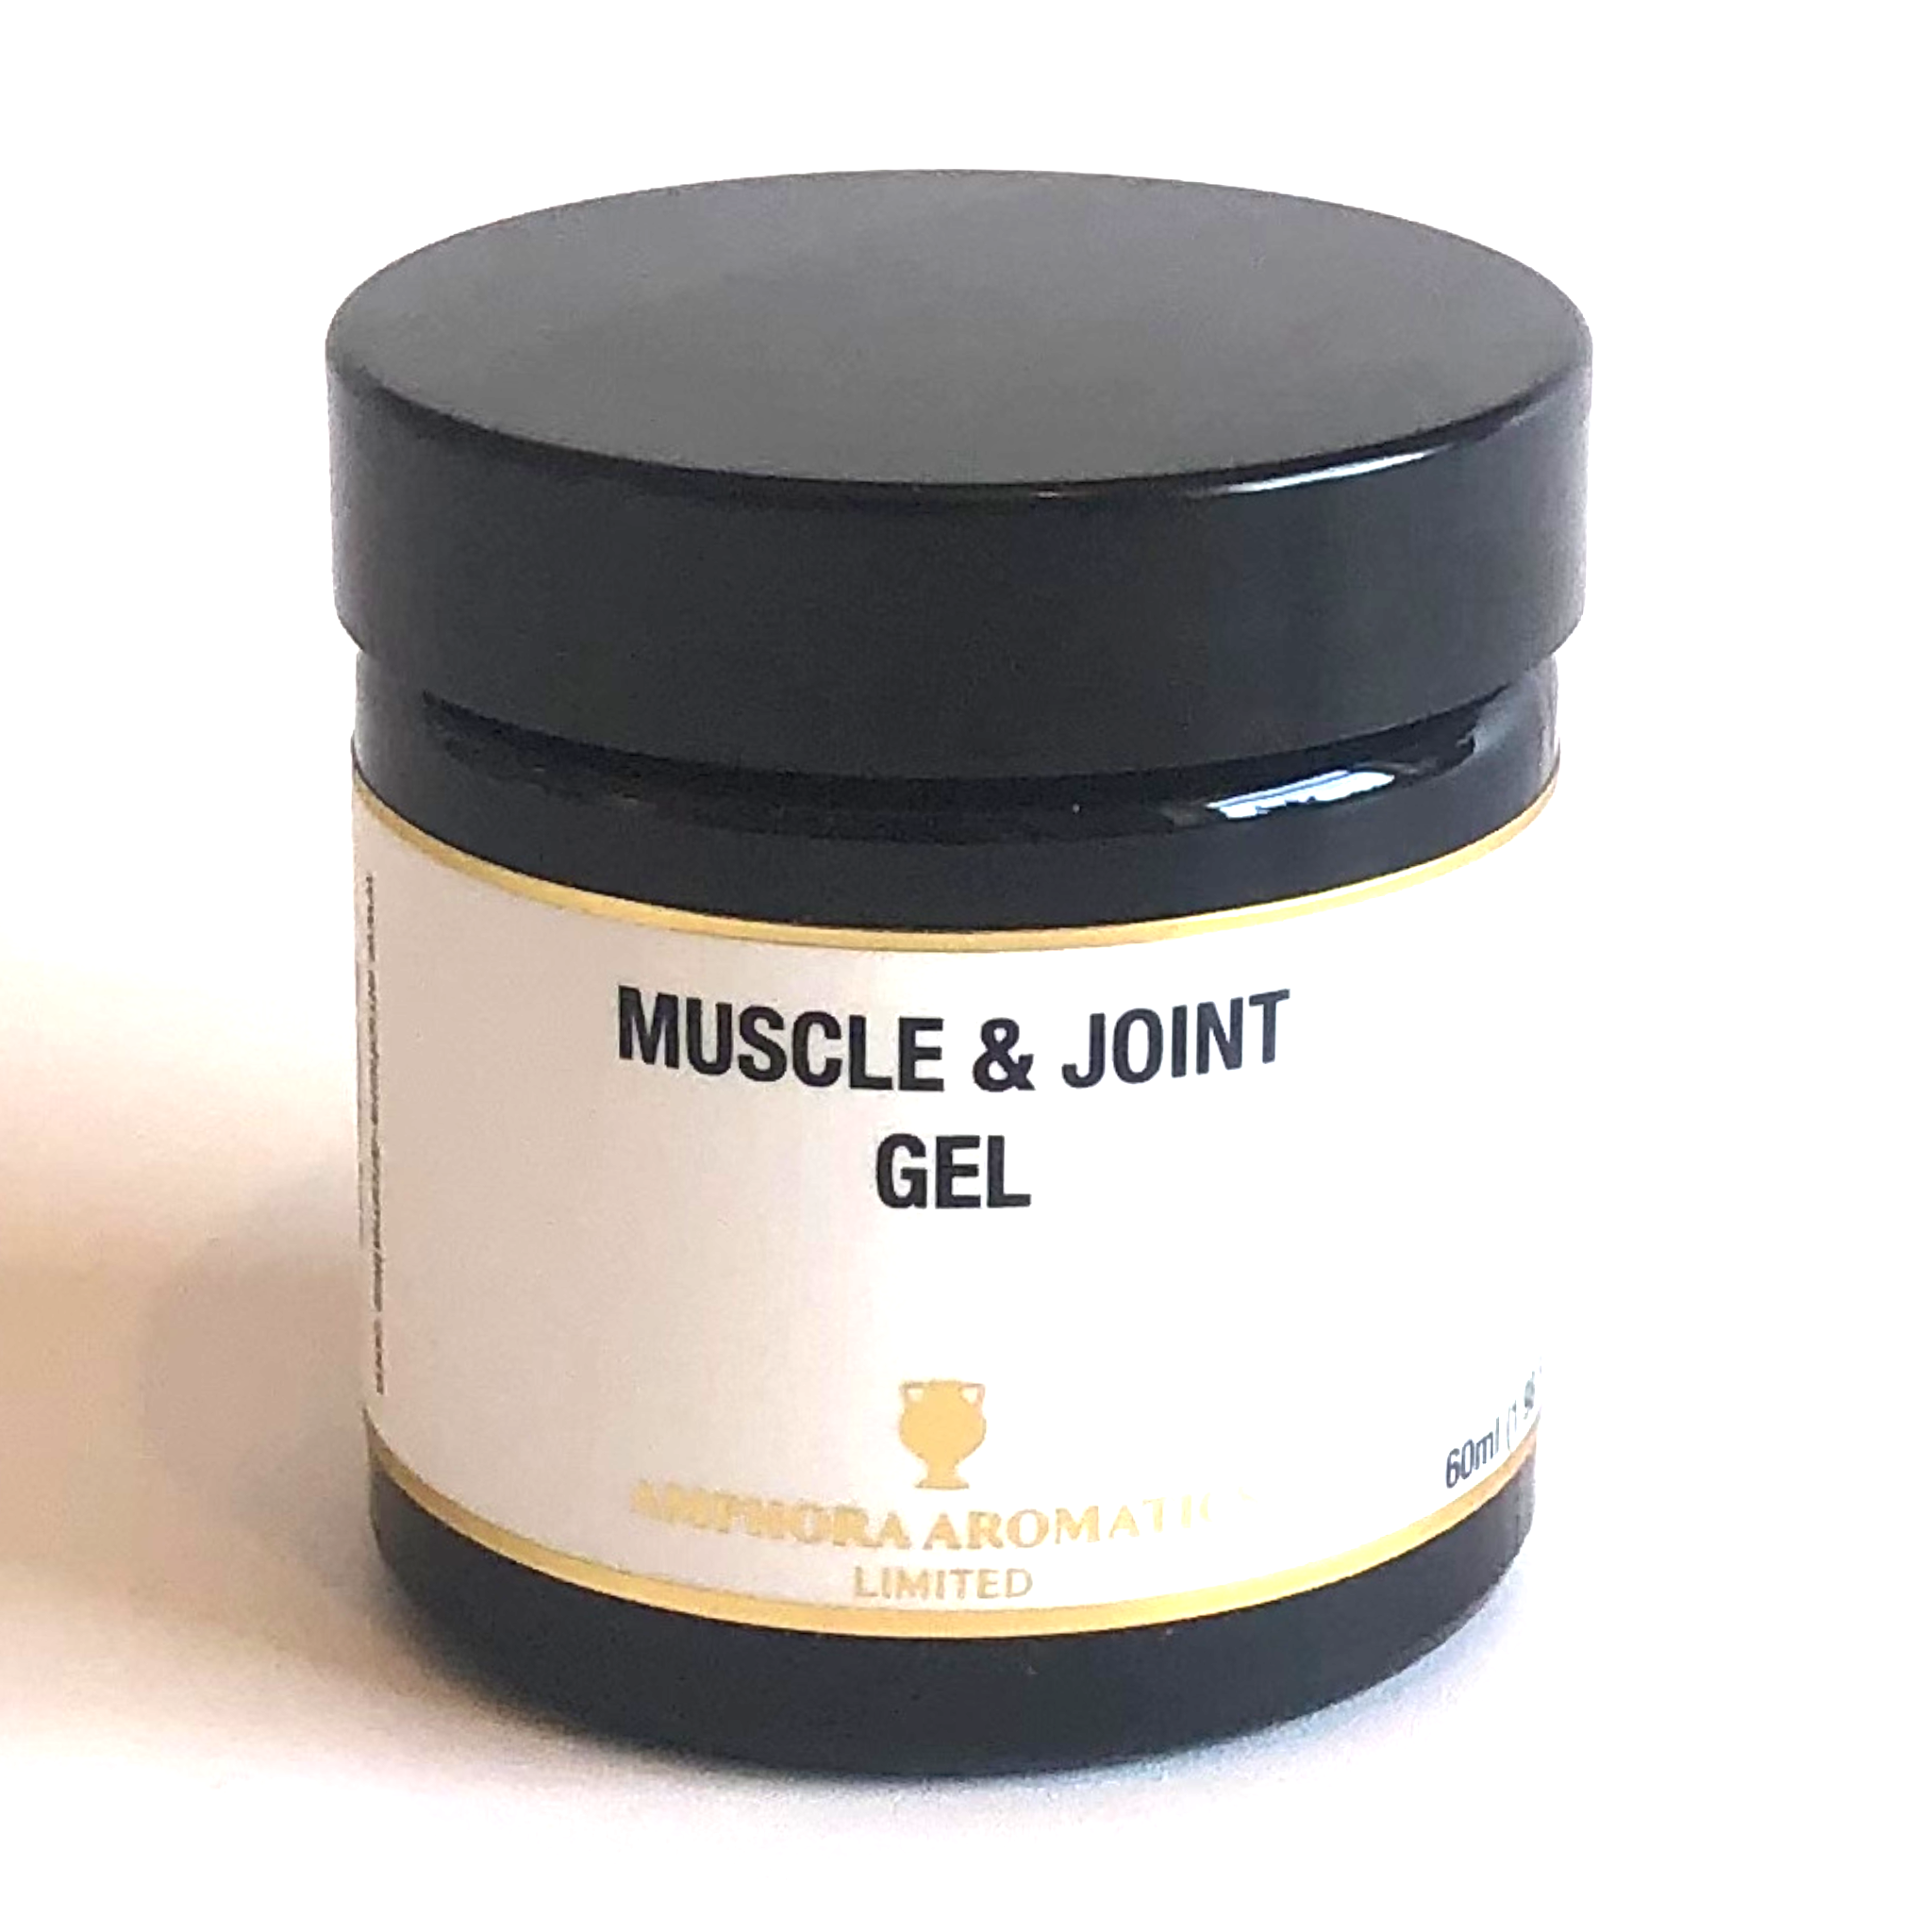 Muscle & Joint Gel by Amphora Aromatics